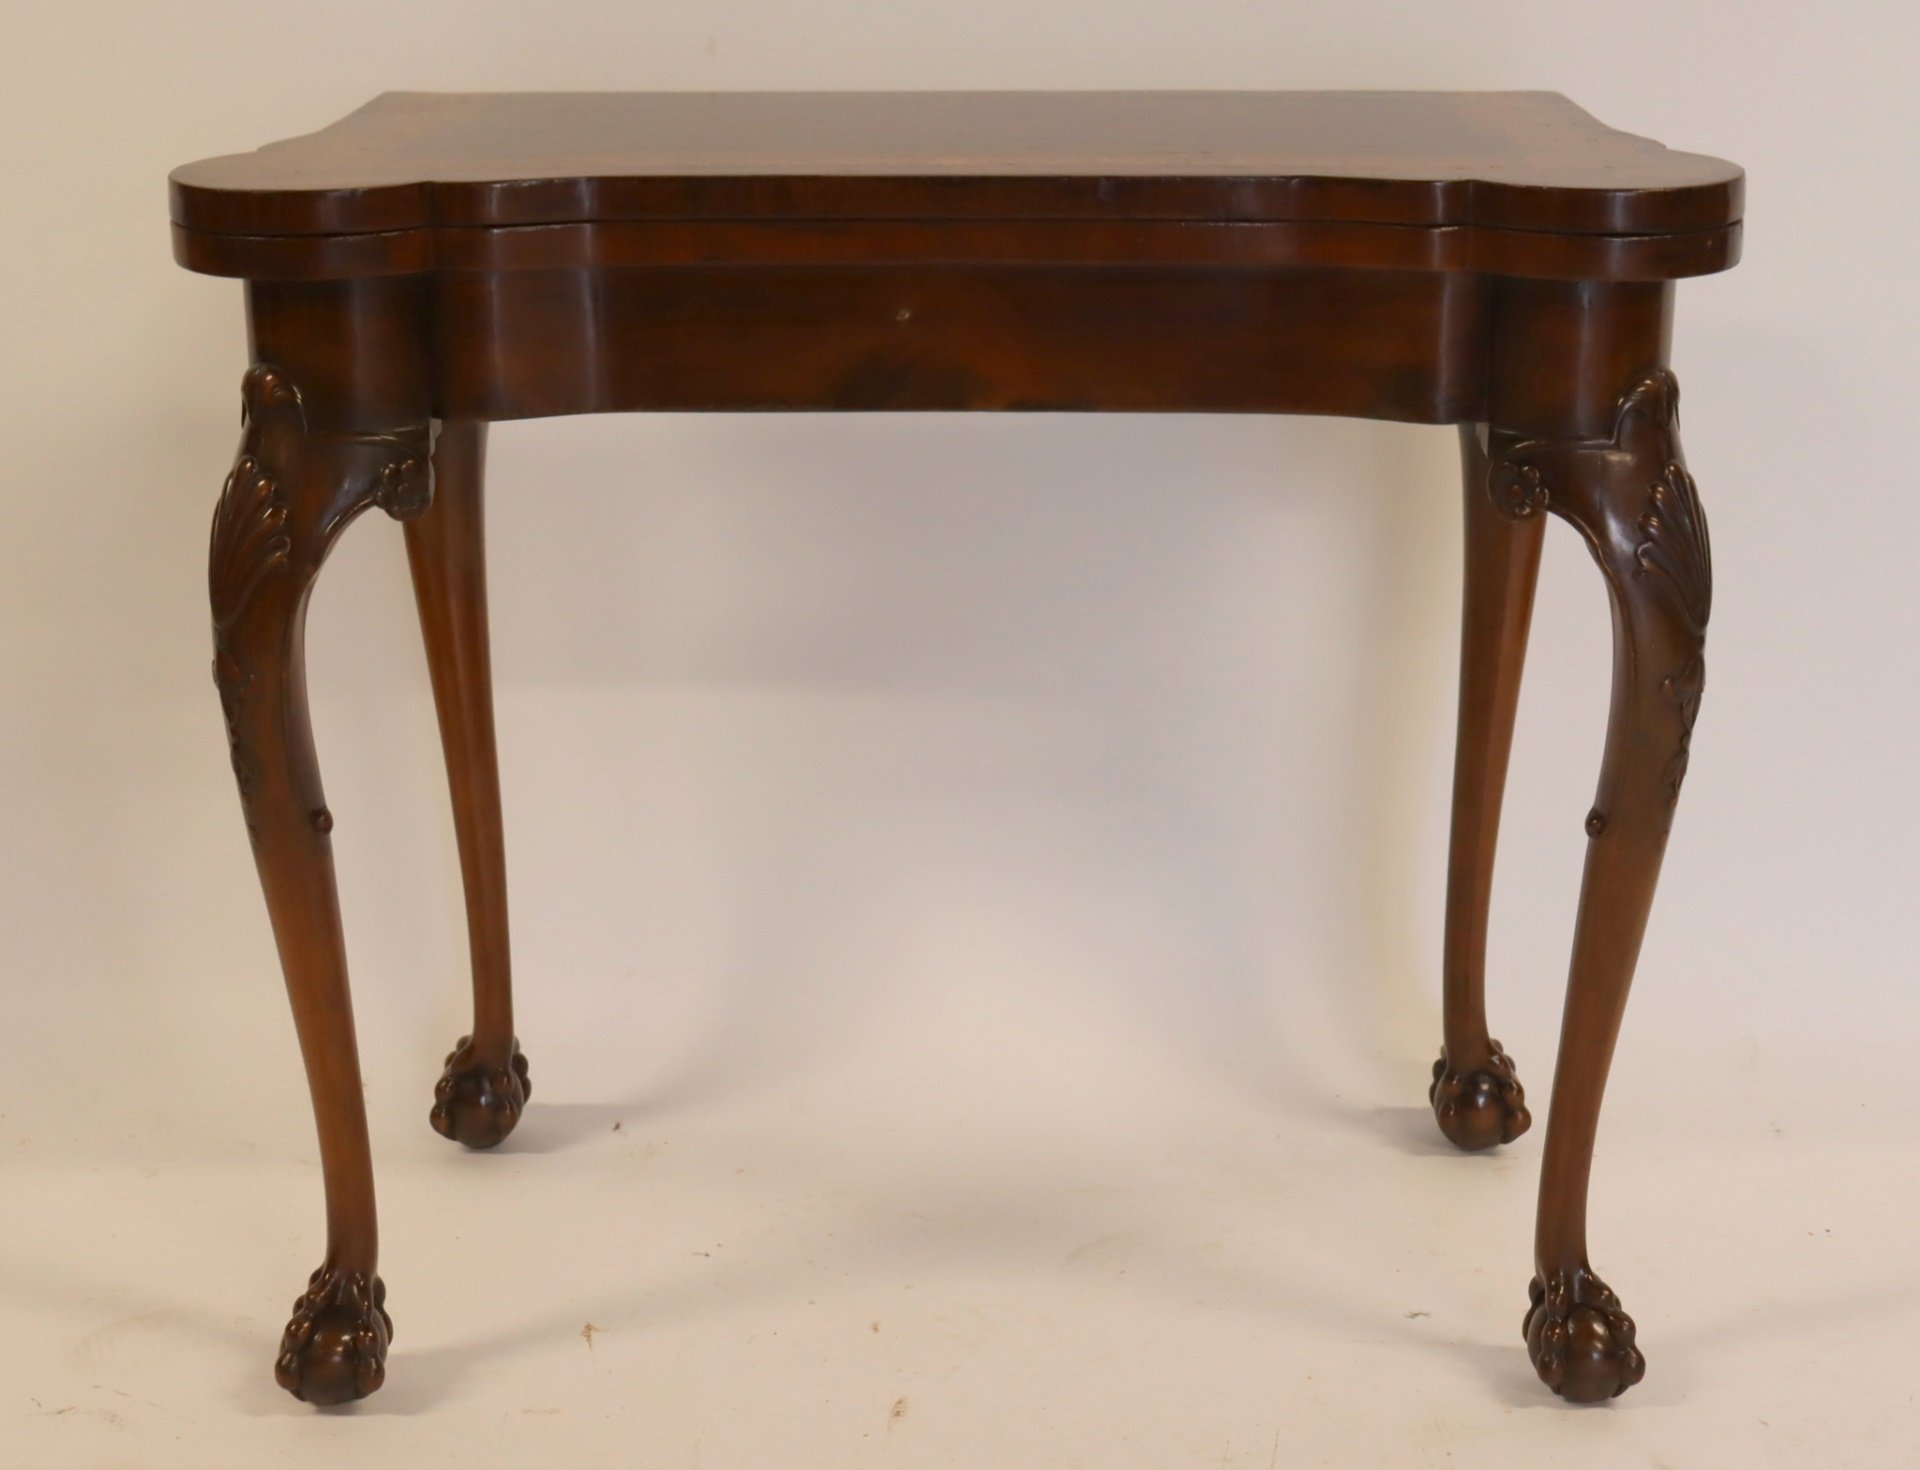 ANTIQUE CHIPPENDALE STYLE INLAID